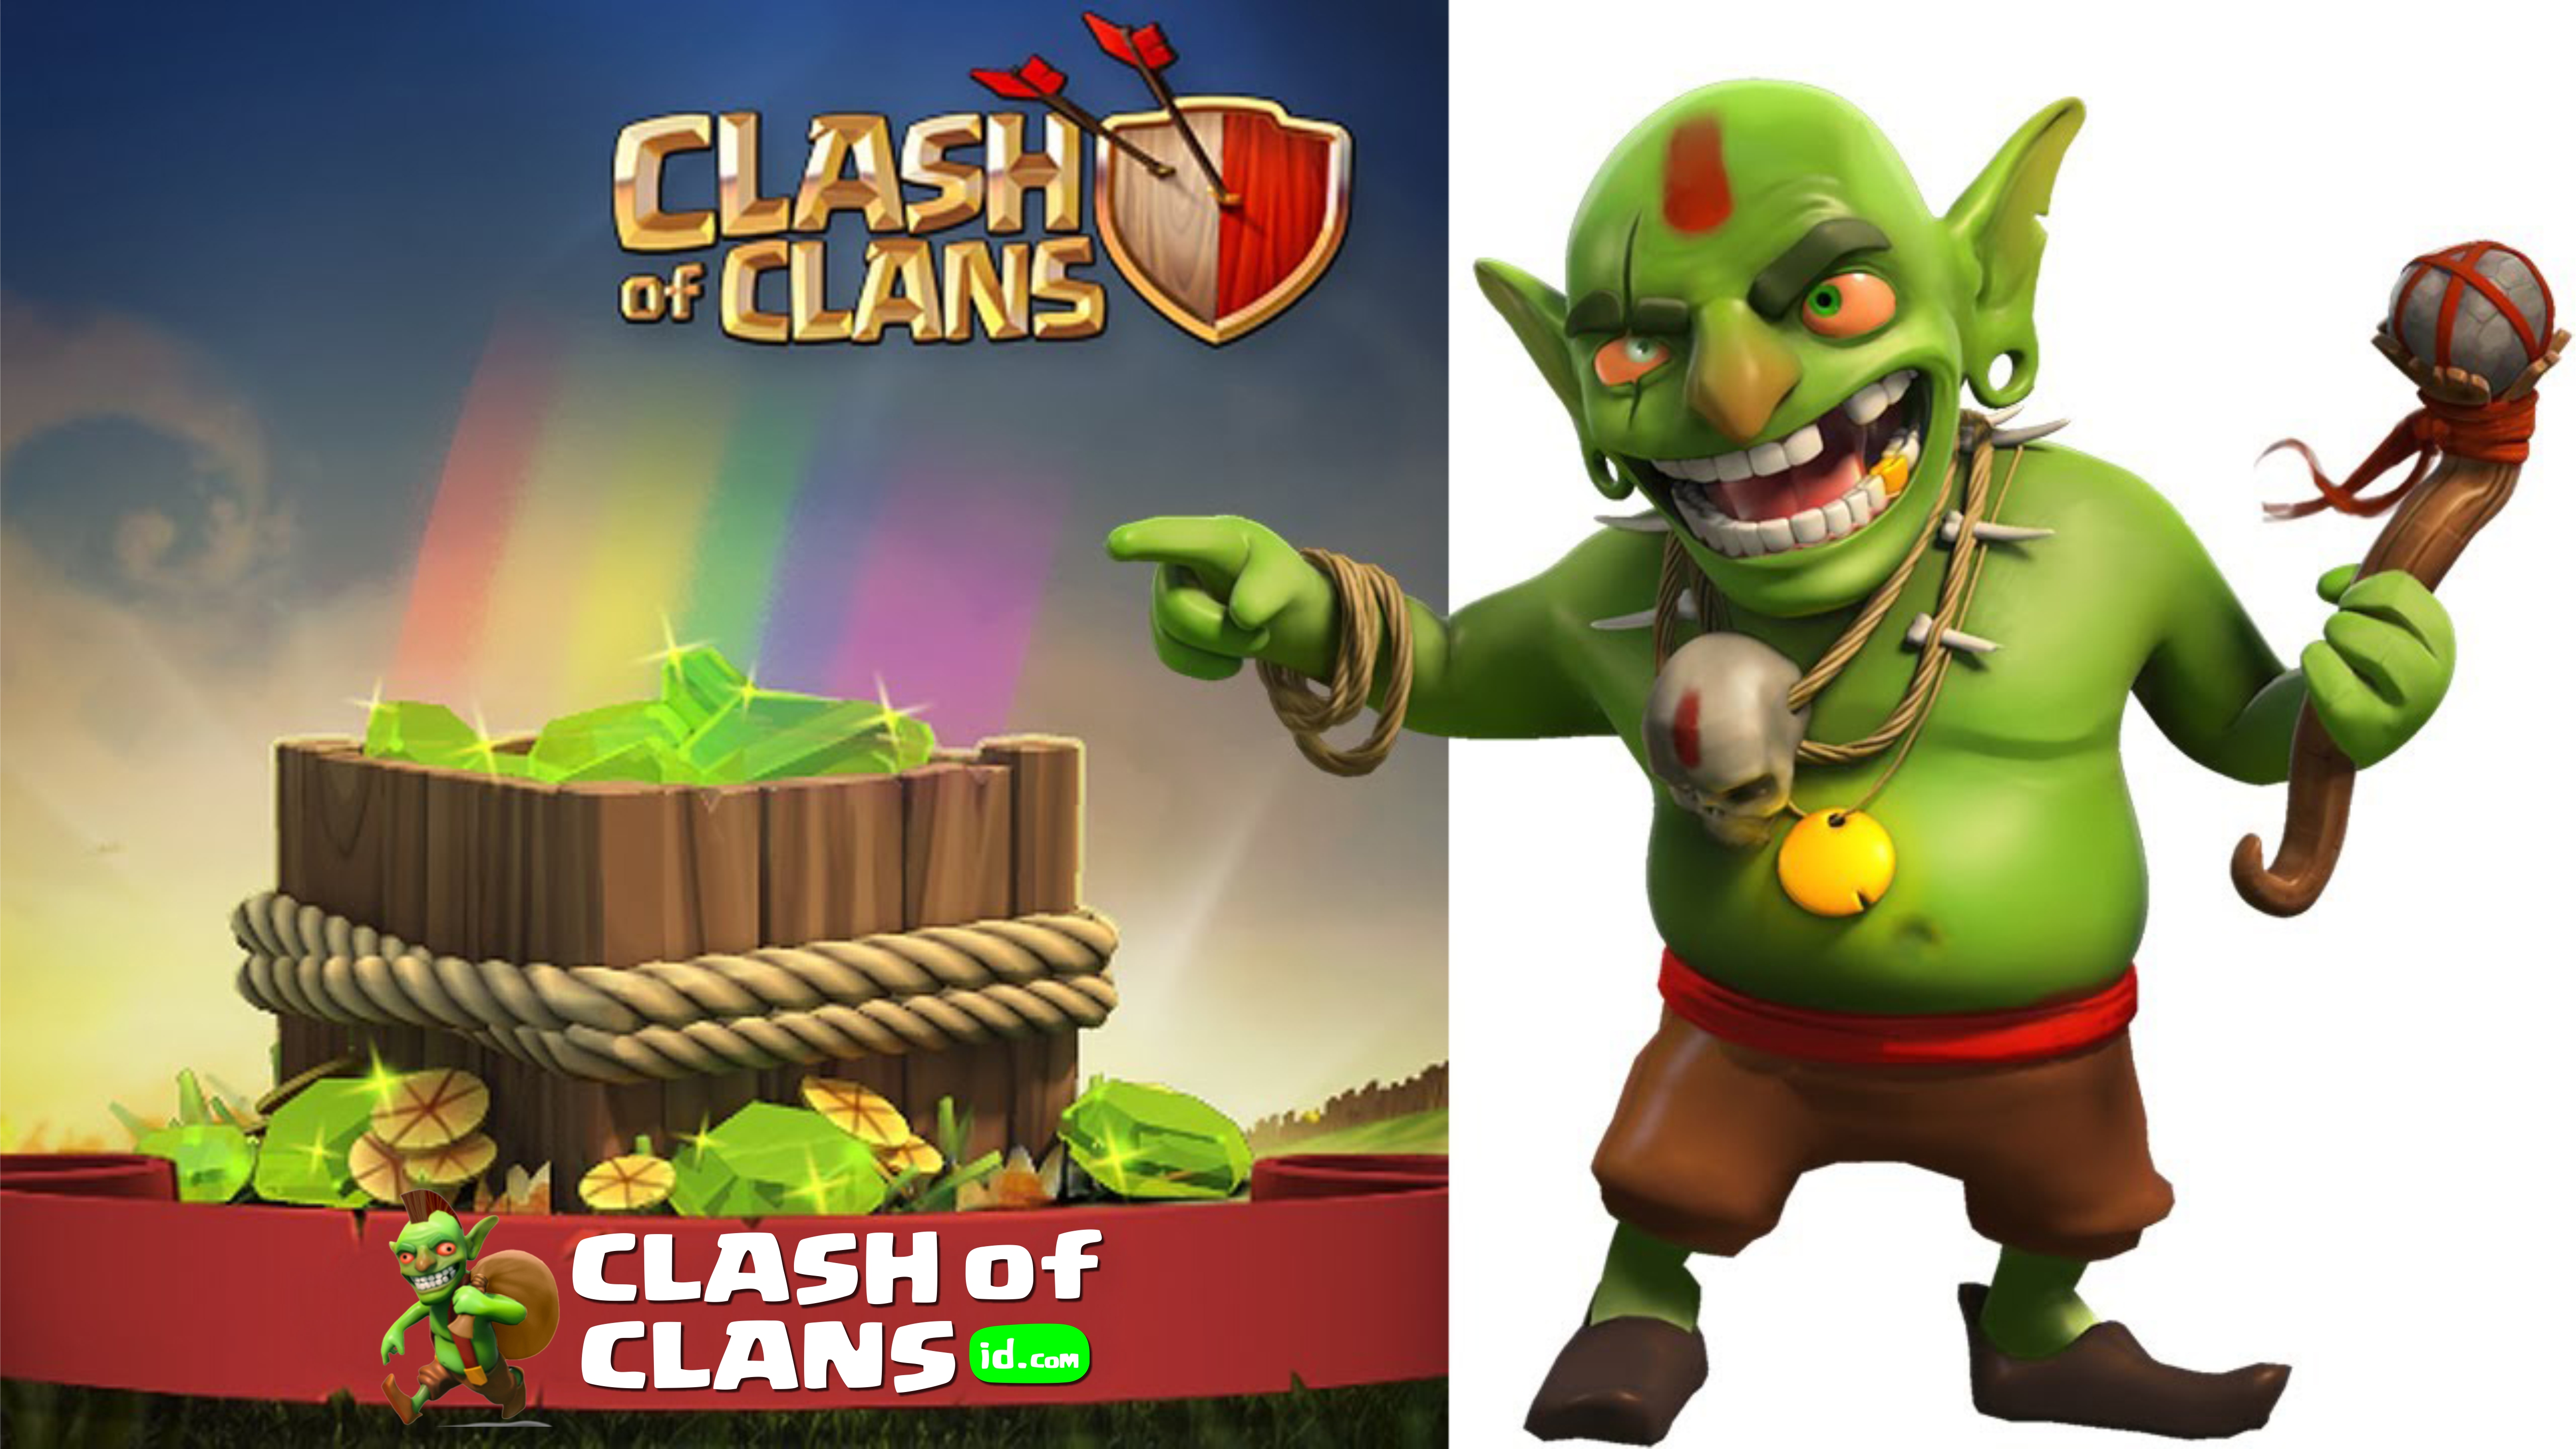 How to Get More Gems for Clash of Clans? 